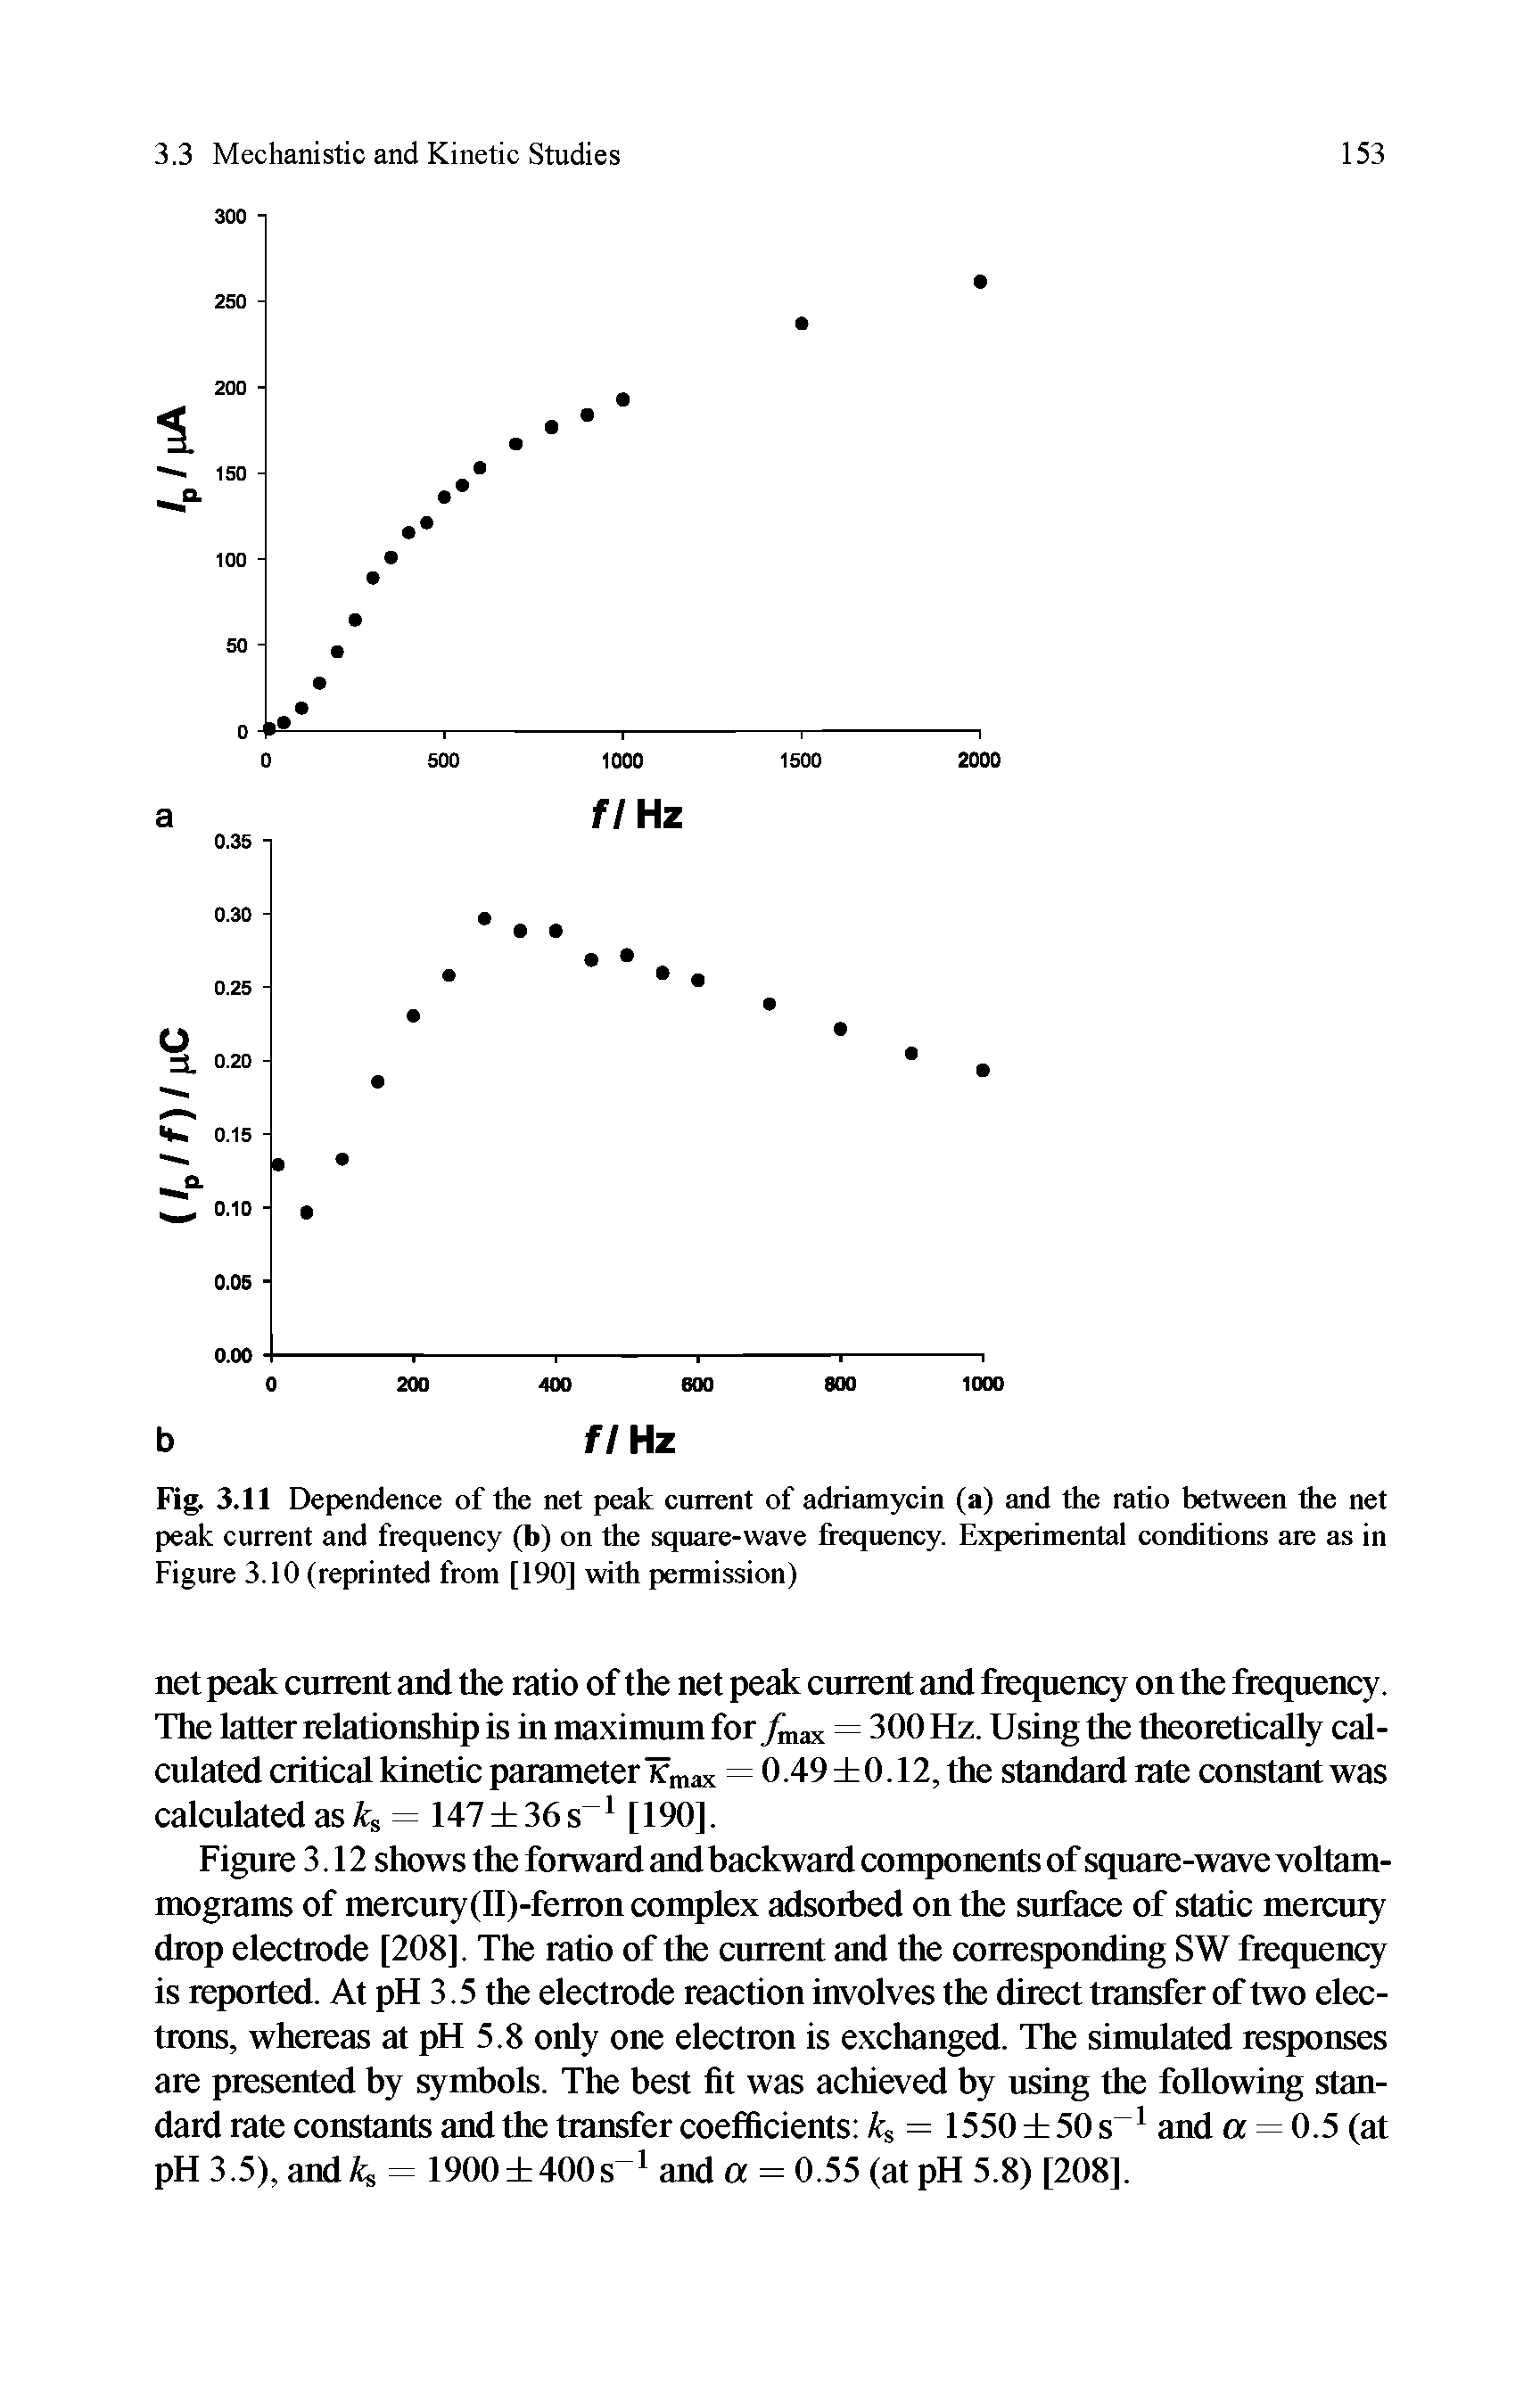 Fig. 3.11 Dependence of the net peak current of adriamycin (a) and the ratio between the net peak current and frequency (b) on the square-wave frequency. Experimental conditions are as in Figure 3.10 (reprinted from [190] with permission)...